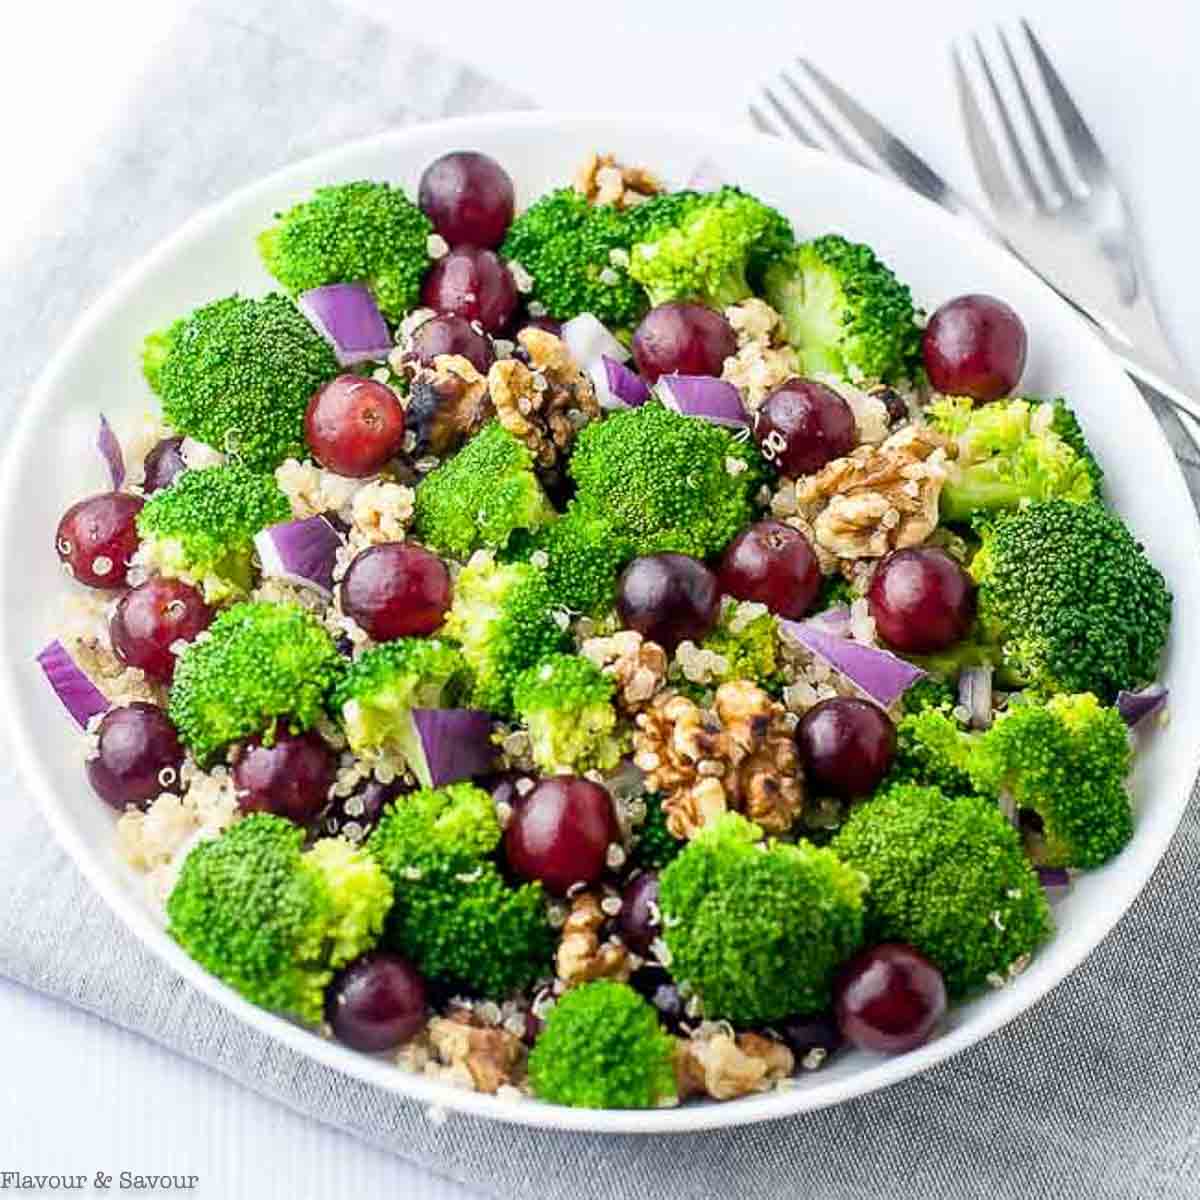 Overhead view of a quinoa salad with grapes, walnuts and broccoli florets.